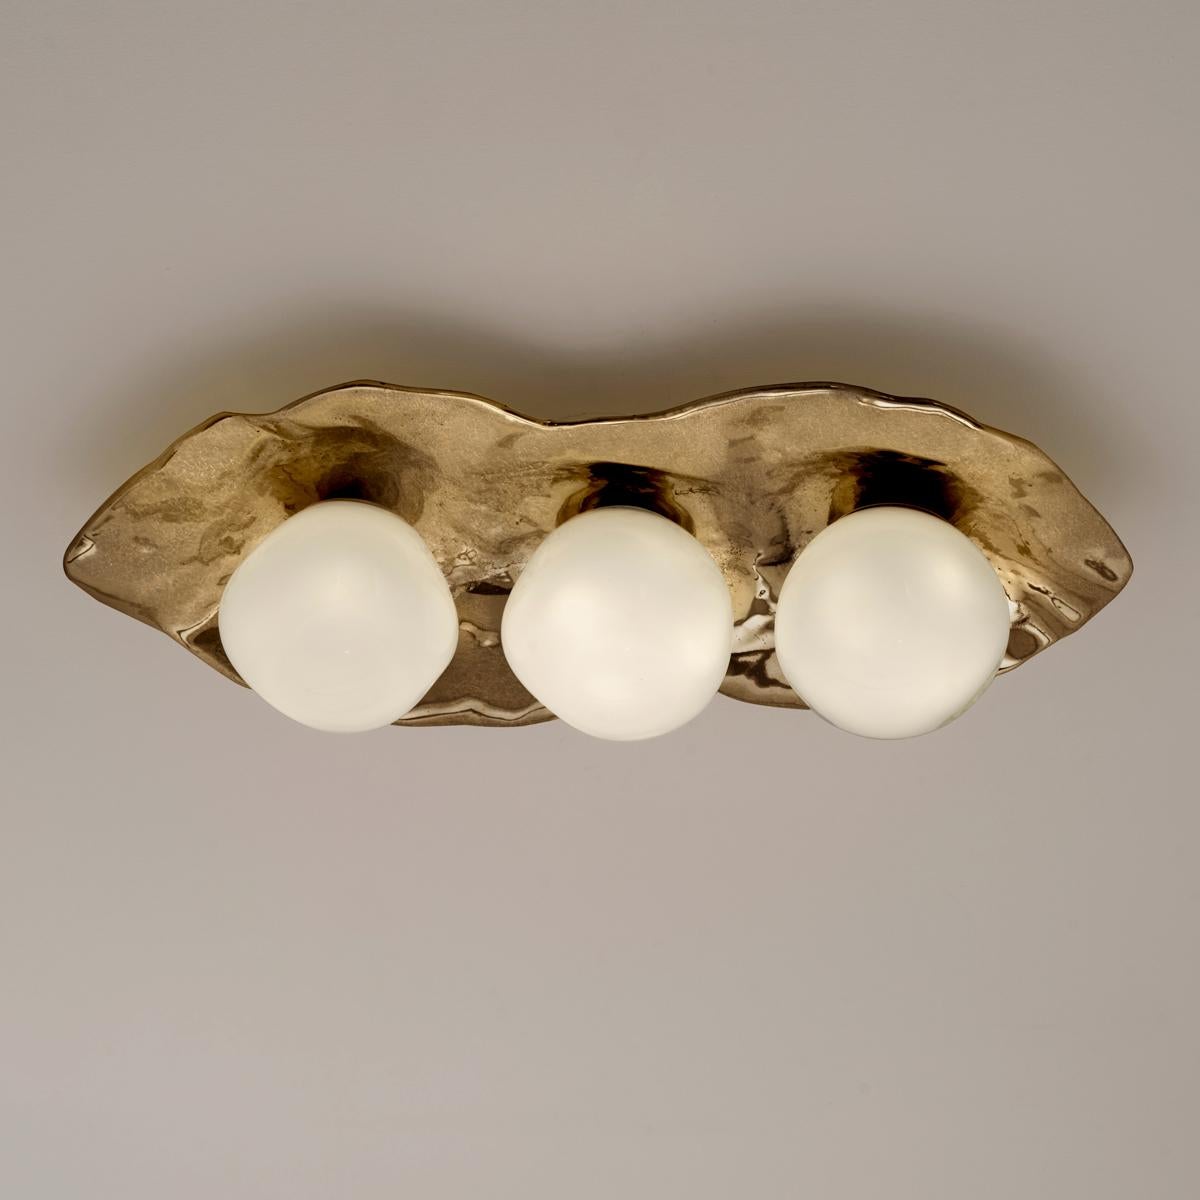 The Shell ceiling light is forged from brass to create an organic shell nestling three of our handblown Sfera glasses made in Murano.

Shown in the primary images in Bronzo Nuvolato-subsequent pictures show the fixture in other featured